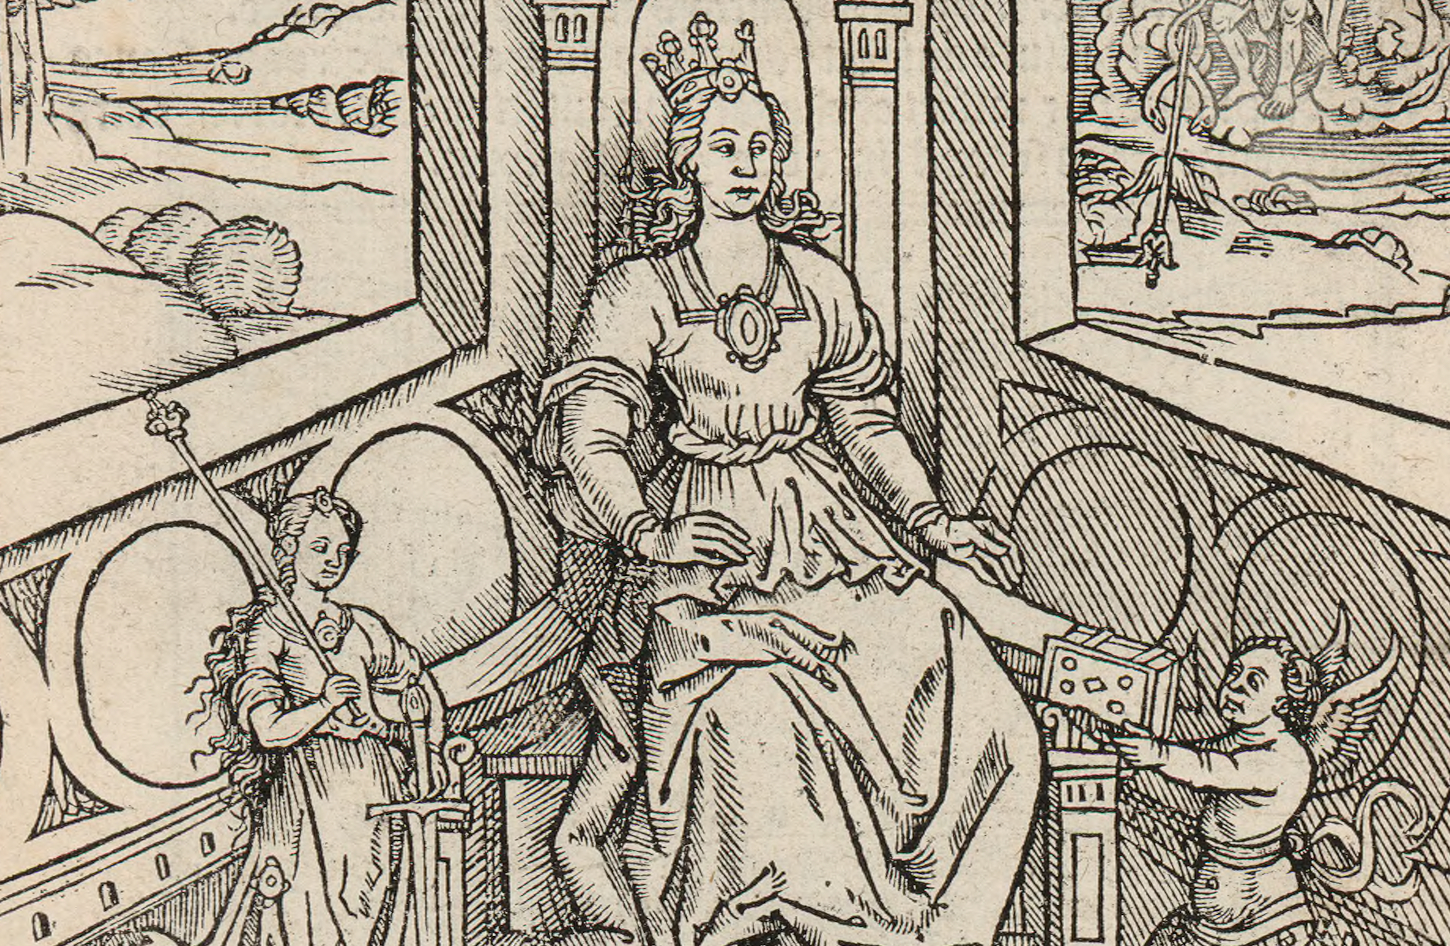 Anne of Brittany on her throne, 16th-century print (detail). Gallica / The National Library of France: Department of Prints and Photography, RESERVE FOL-QB-201 (3).